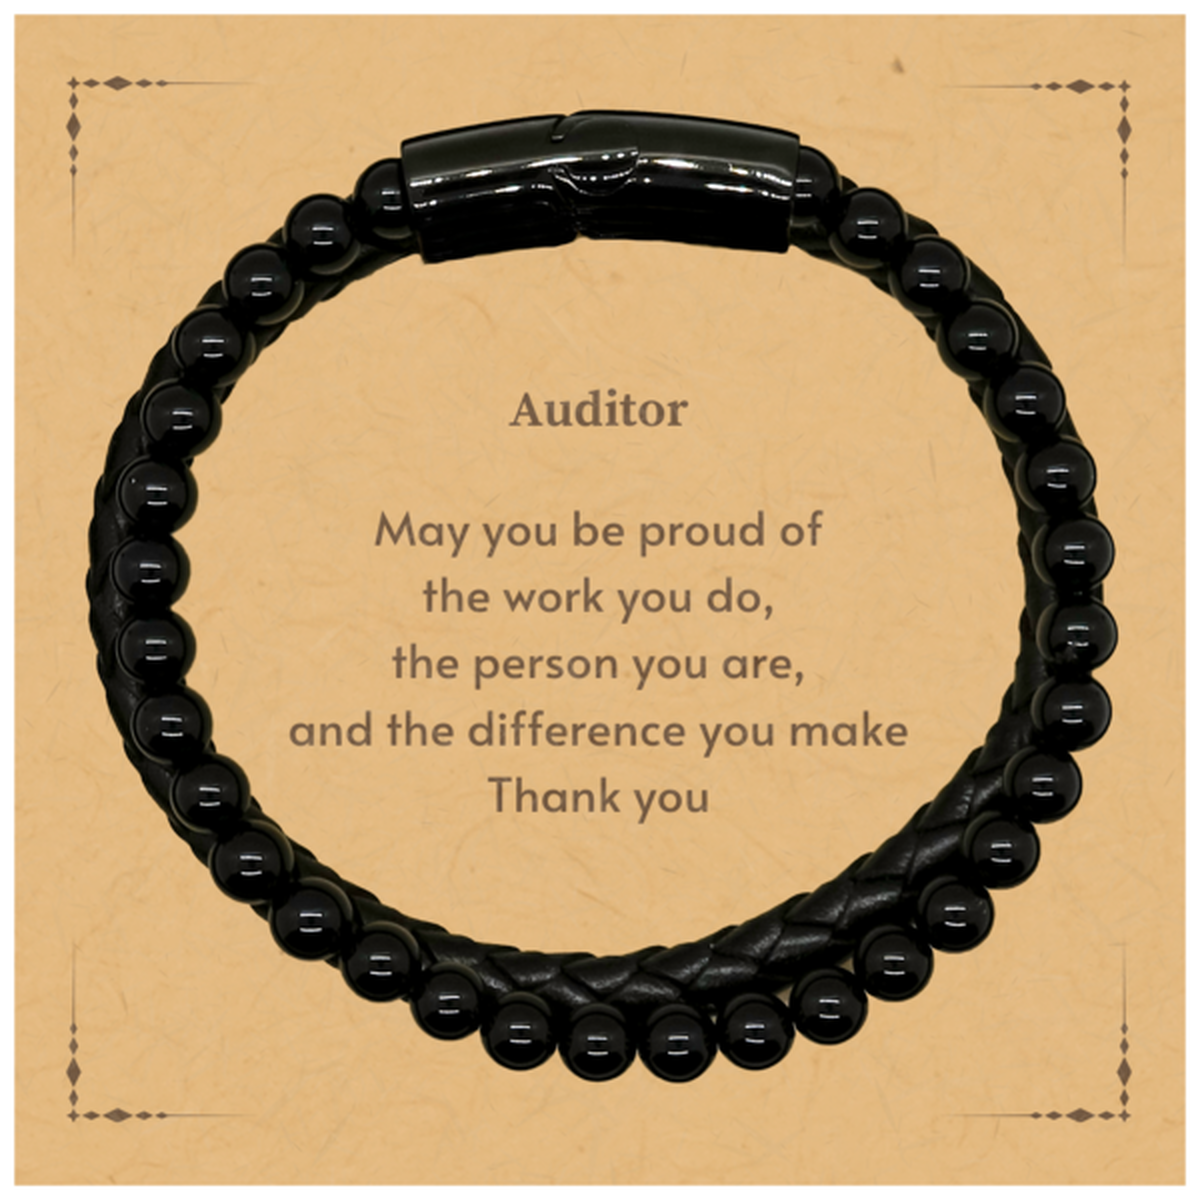 Heartwarming Stone Leather Bracelets Retirement Coworkers Gifts for Auditor, Auditor May You be proud of the work you do, the person you are Gifts for Boss Men Women Friends